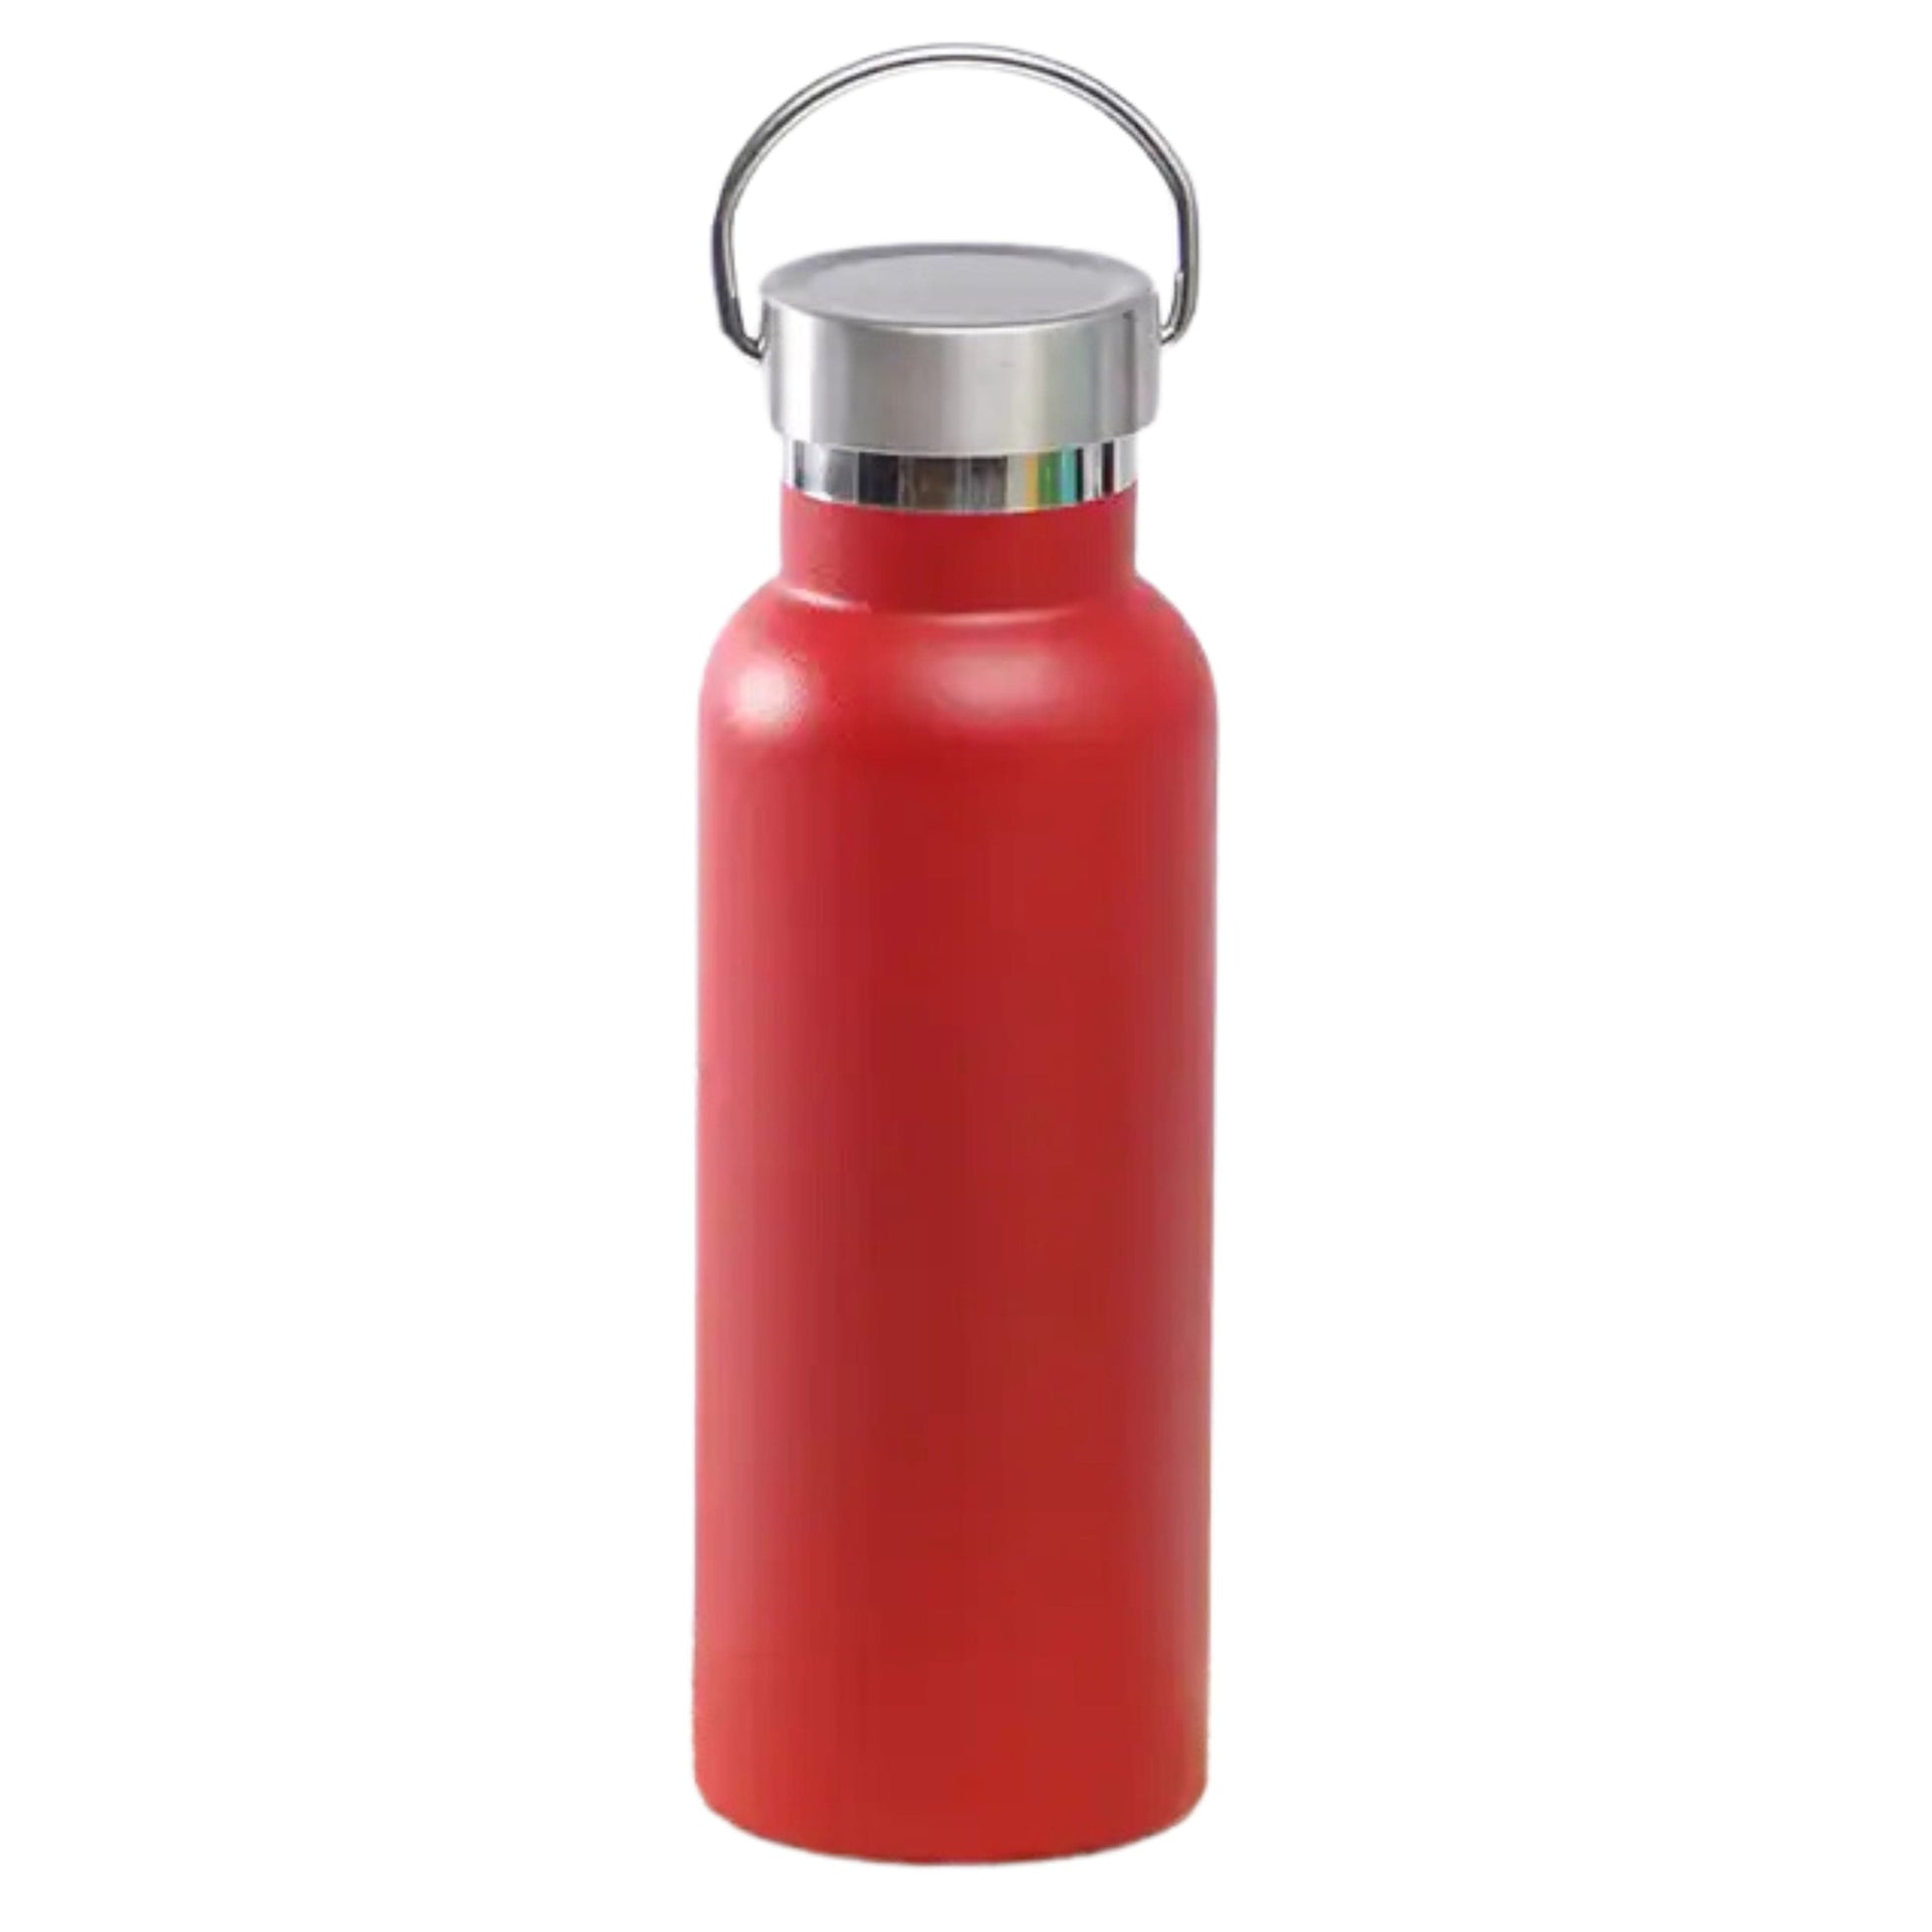 BRANDS & BEYOND Kitchenware Red Steel Water Bottle Double-Layer Vacuum